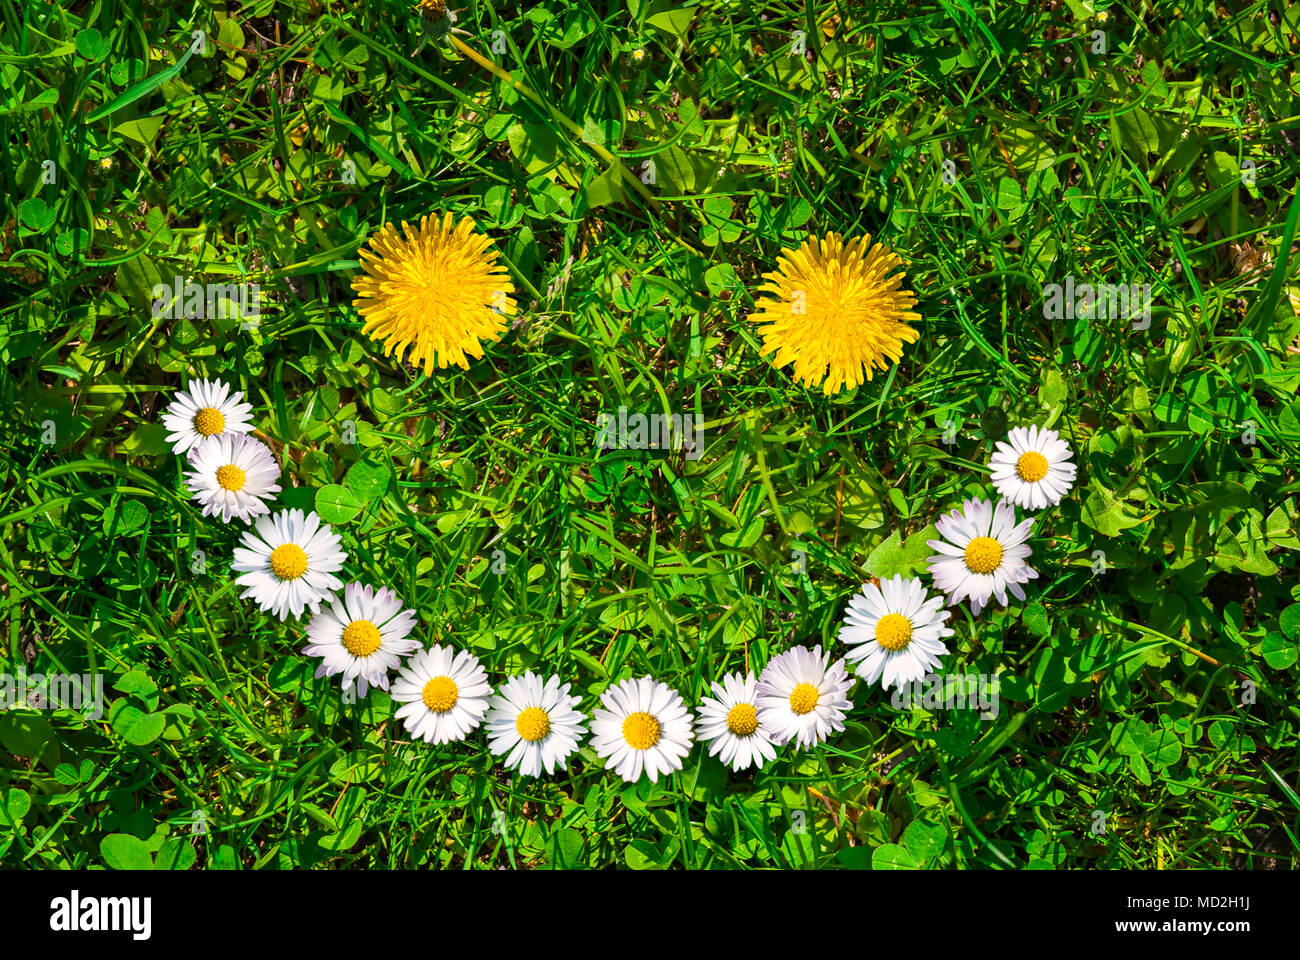 Smiley face of yellow dandelions and white daisies on green grass at summer day. Stock Photo